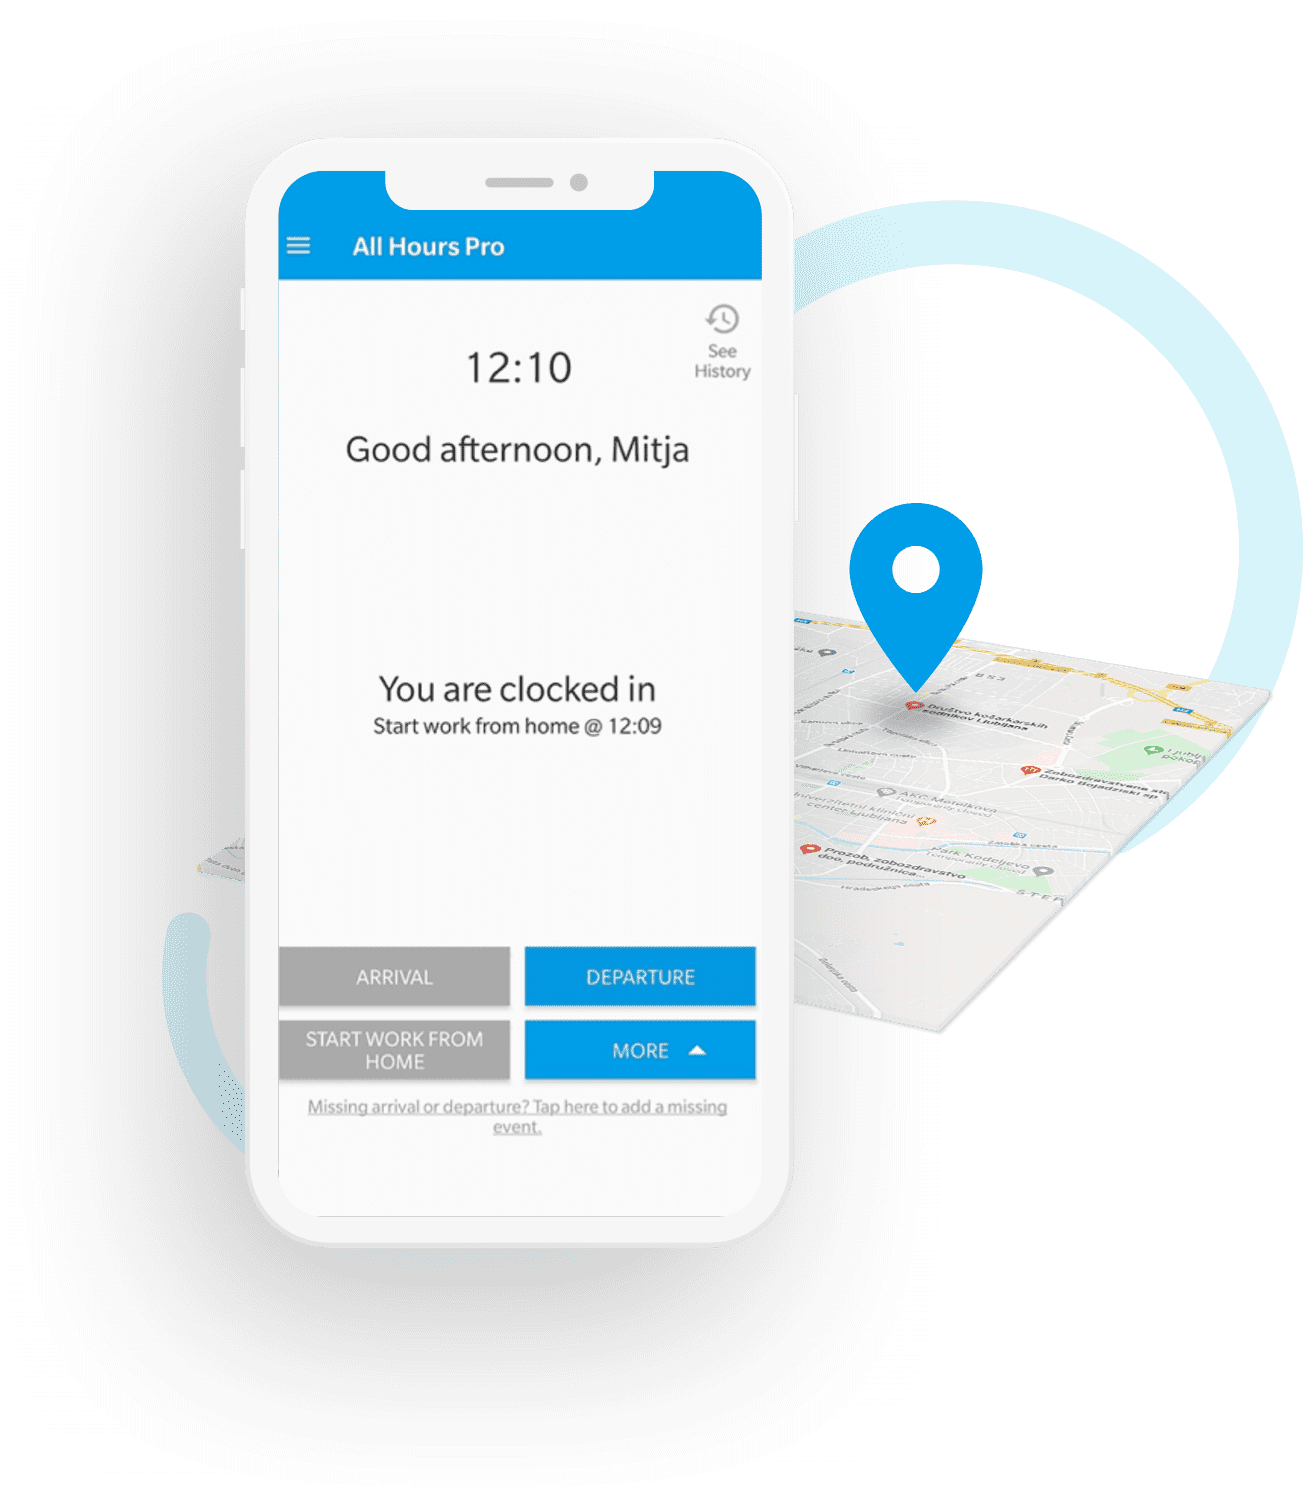 Location tracking and geofencing